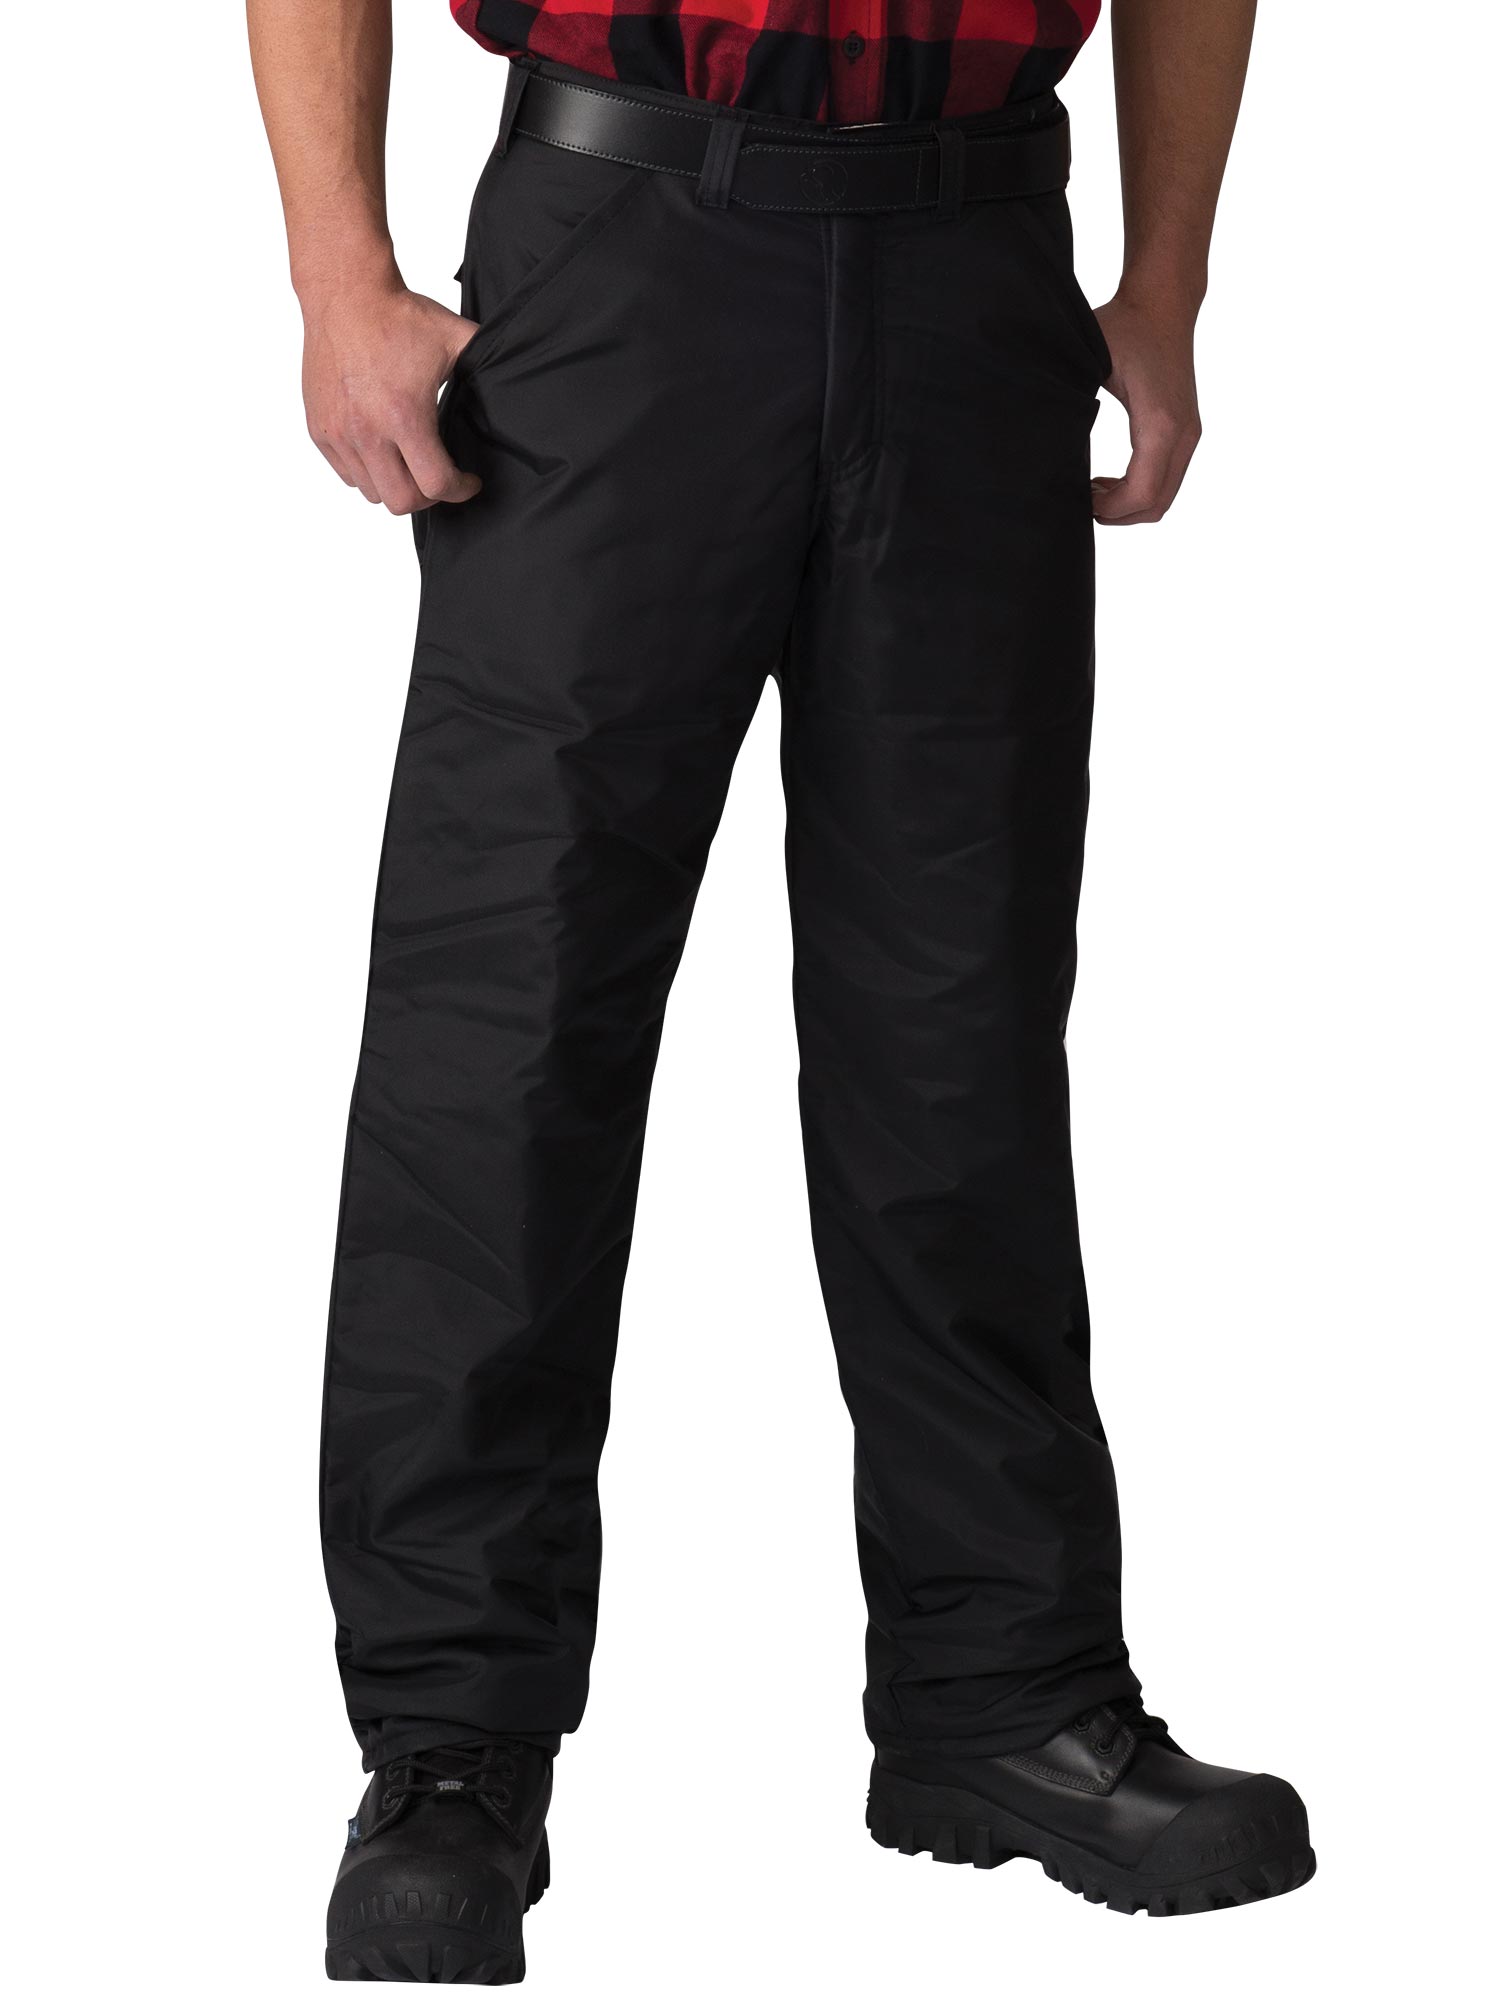 Trouser  Polyester Microfiber Latex and Nylon  S to XXL Suppliers  1478962  Wholesale Manufacturers and Exporters